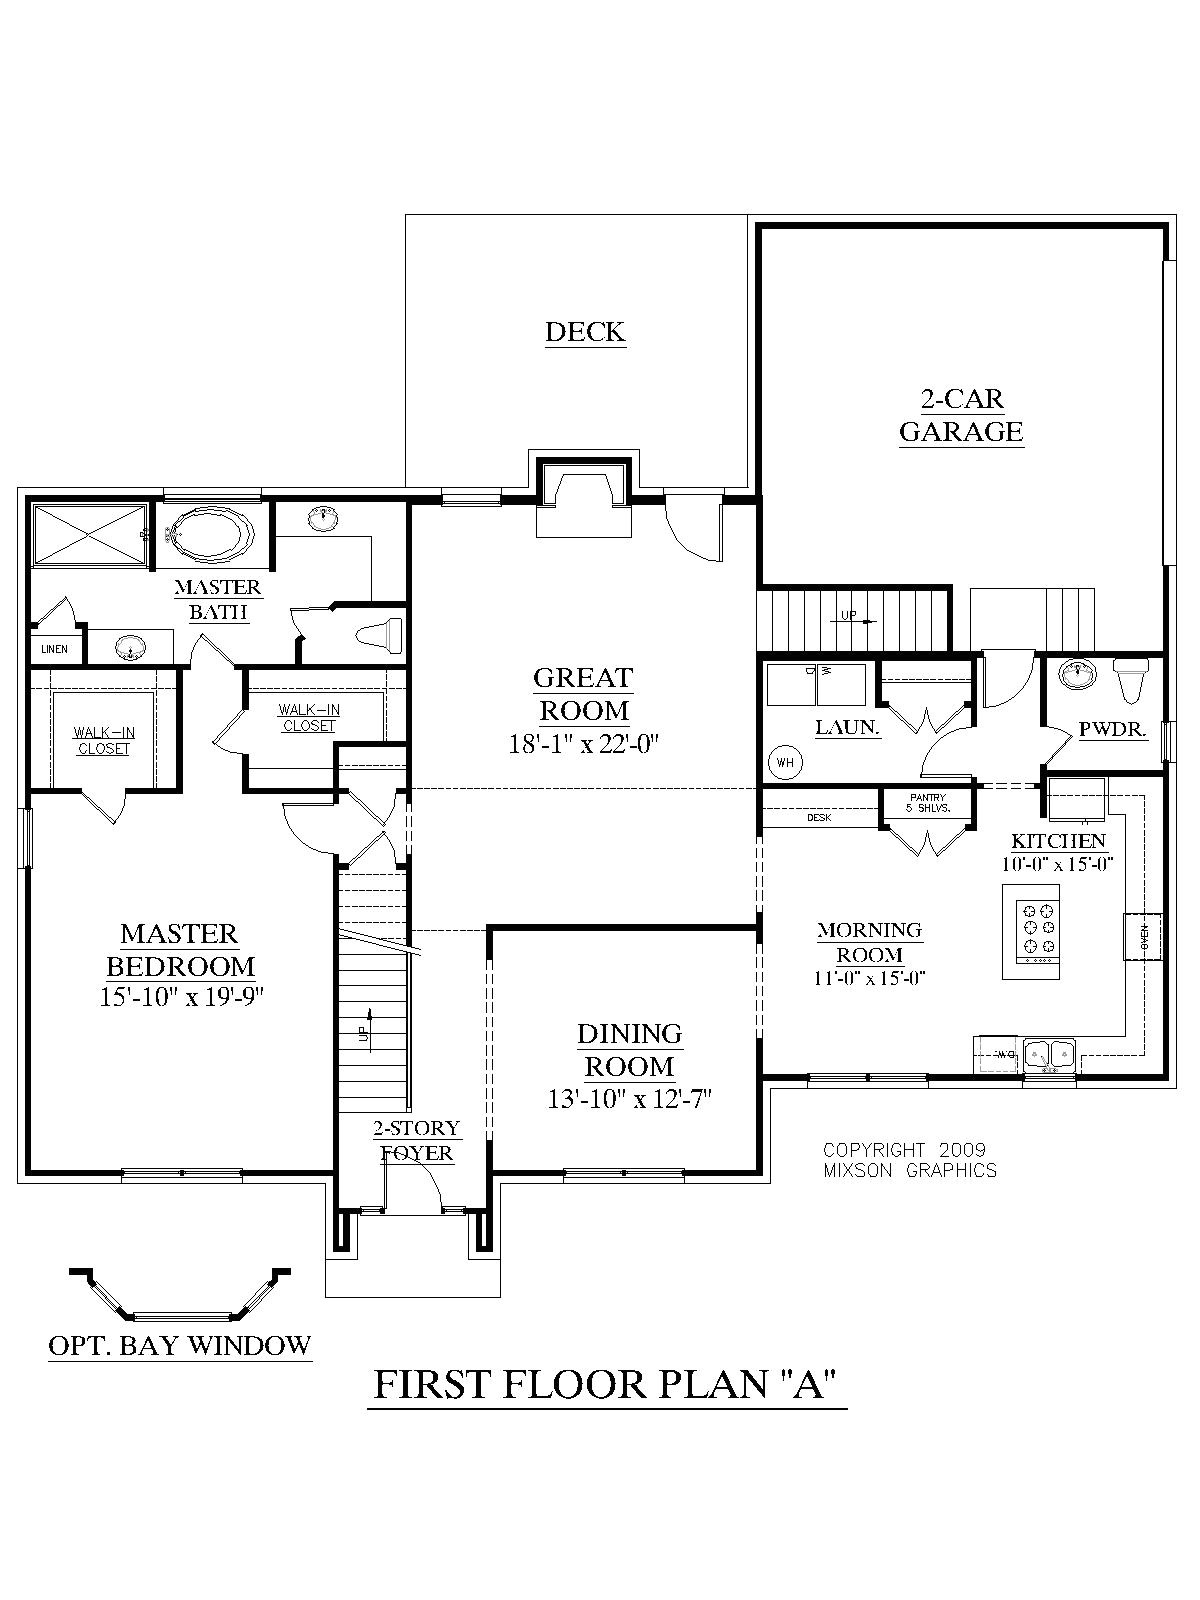 Richland Homes Quartz Floor Plan southern Heritage Home Designs House Plan 2862 A the